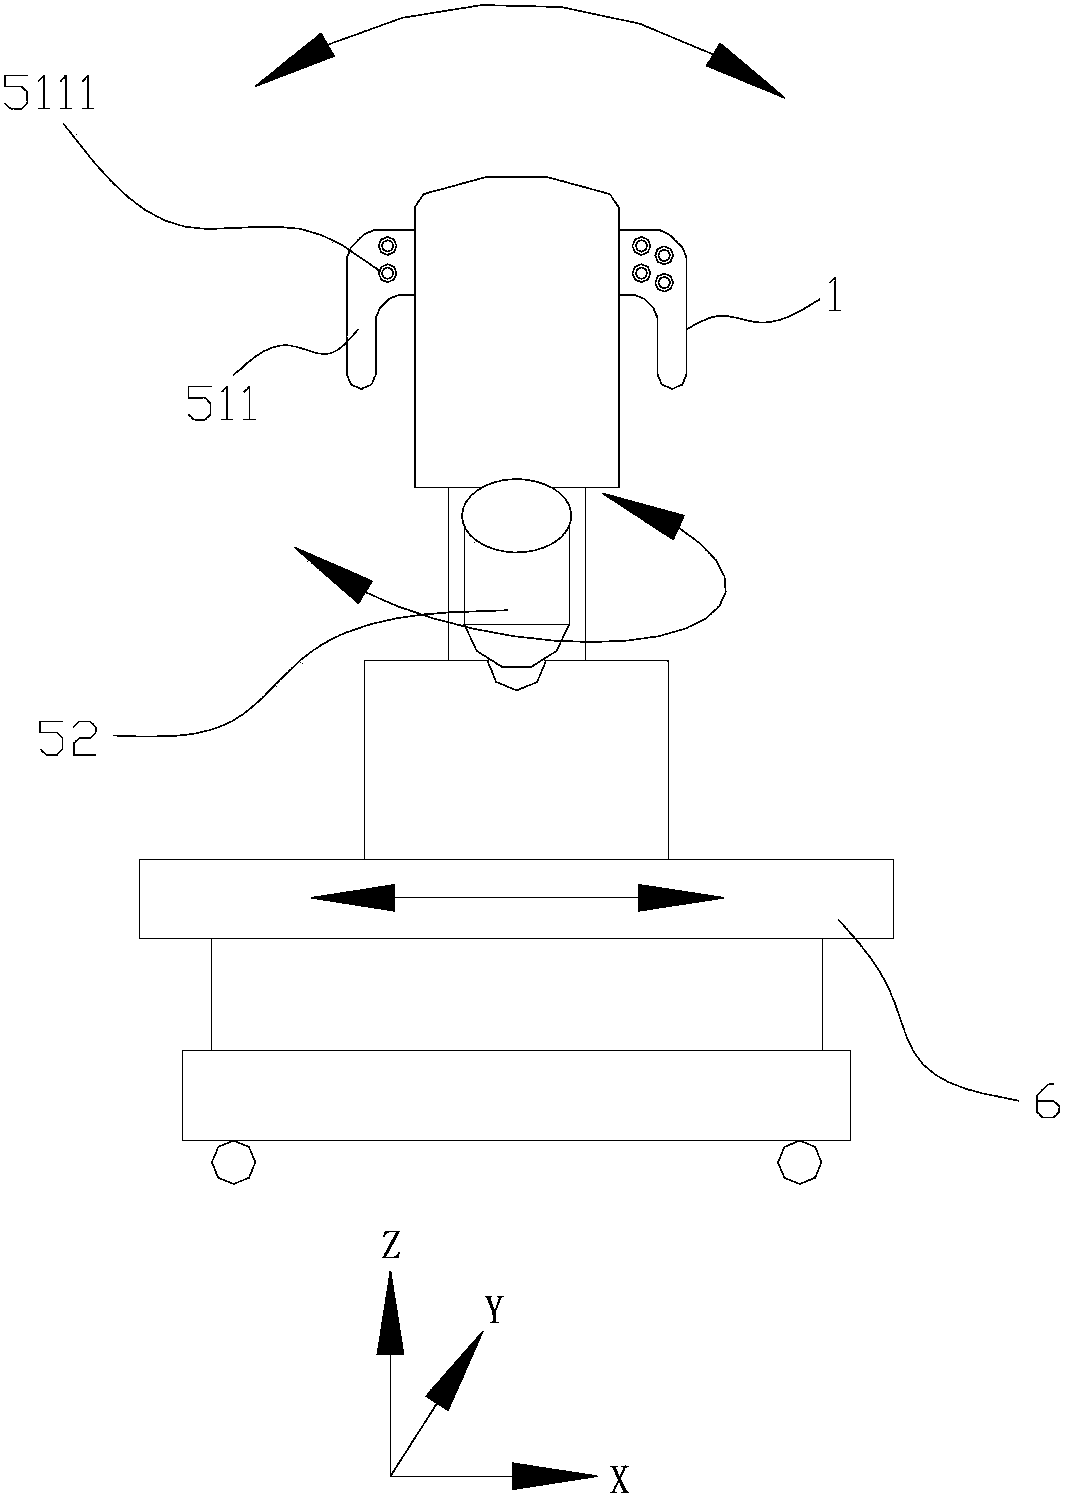 Six-degree-of-freedom moving mechanism for extracorporeal shock wave device